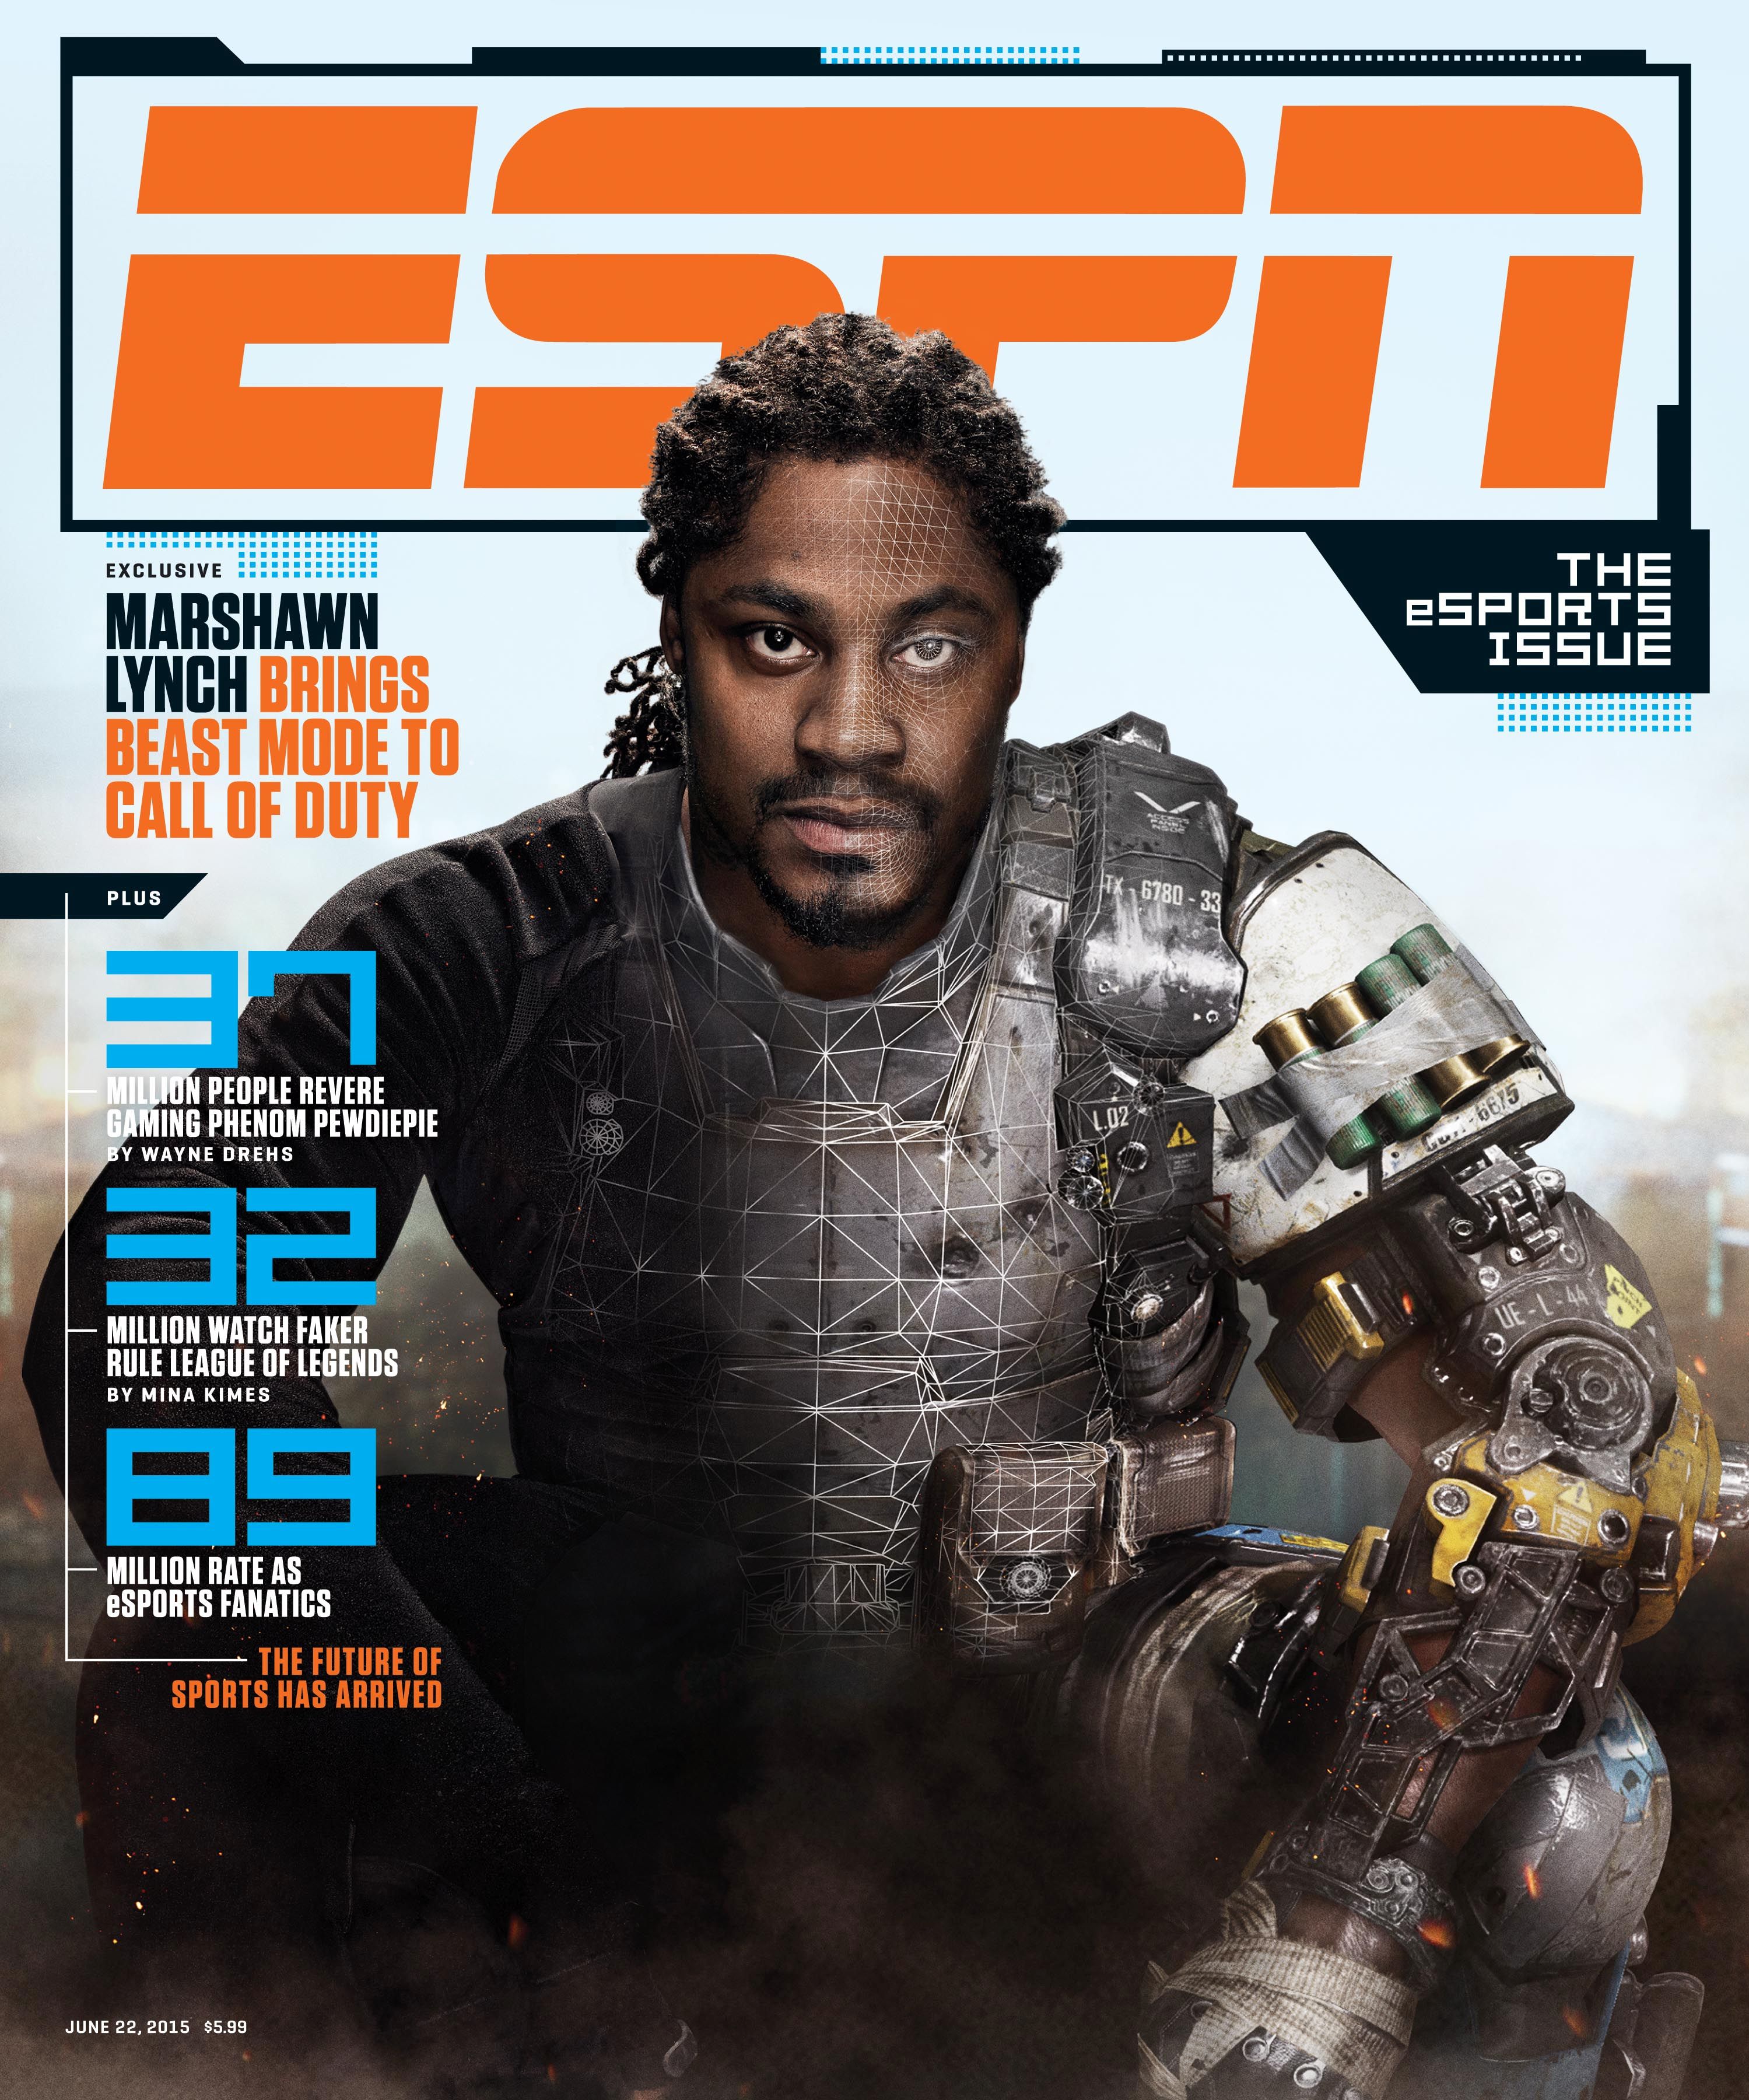 In celebration of its 15th anniversary, ESPN The Magazine